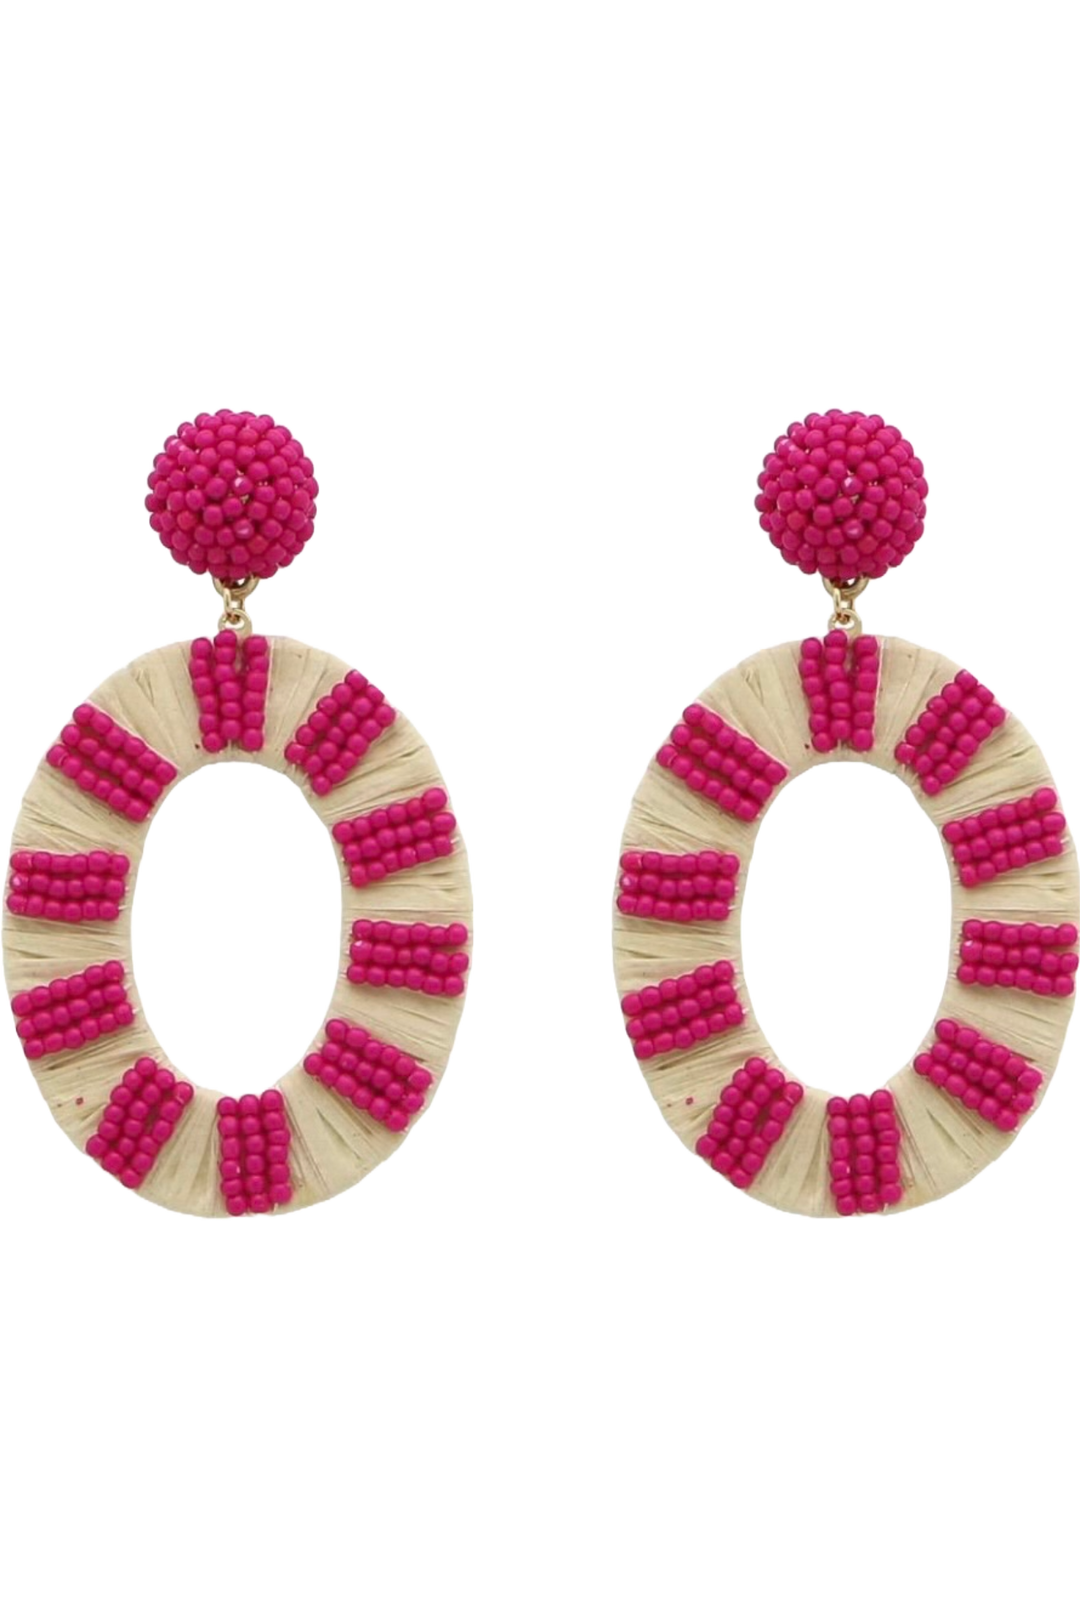 The Ava Earring- Pink